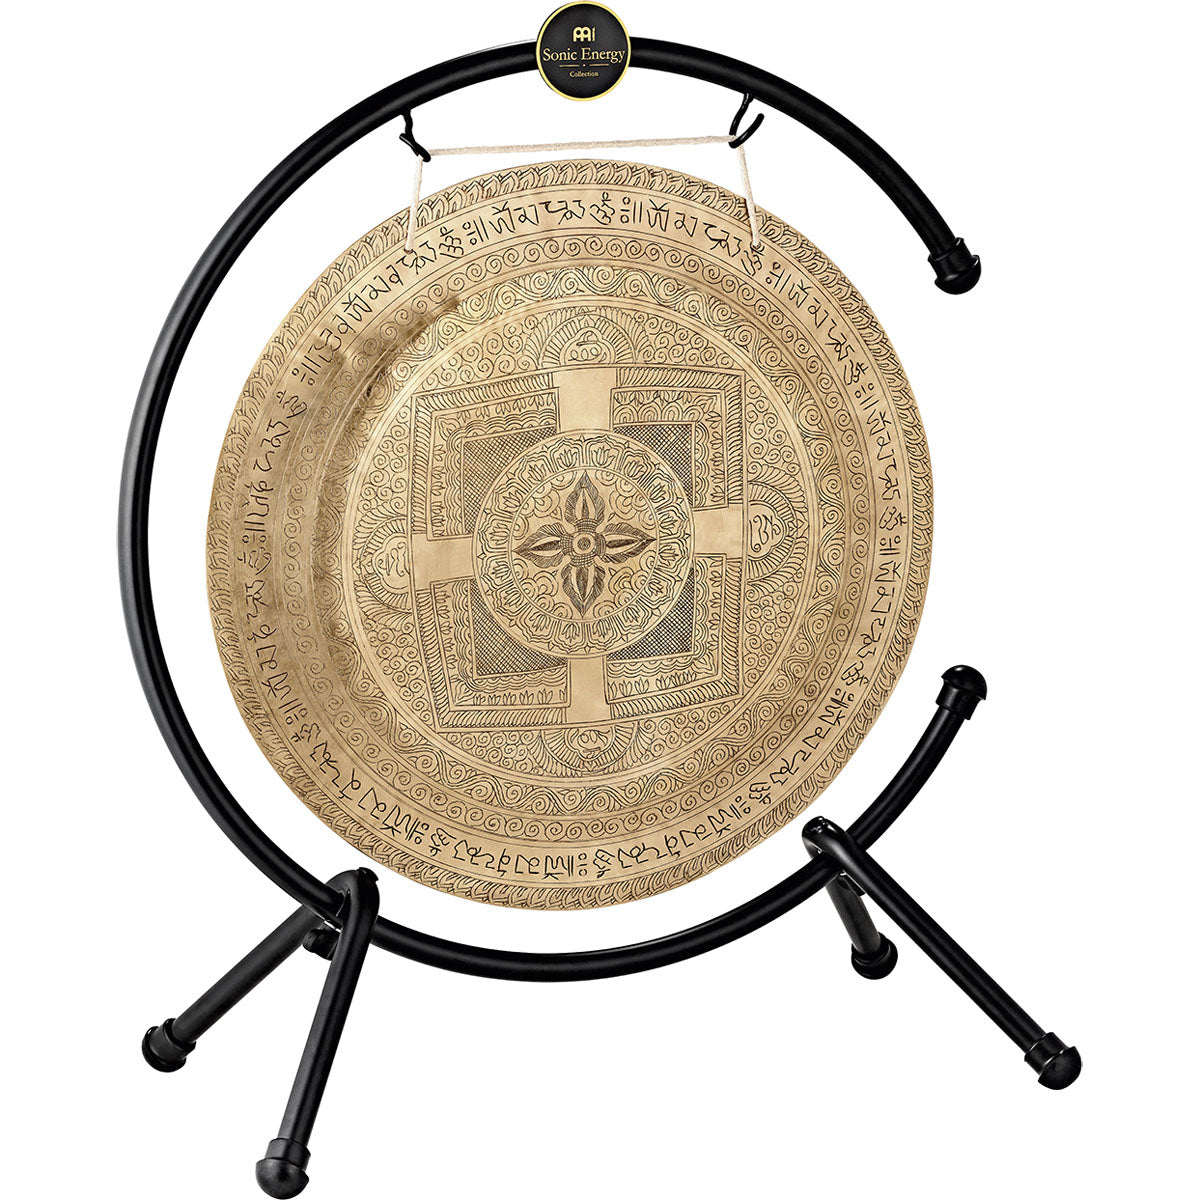 Meinl Sonic Energy 22" Indian Premium Wind Gong Inc. Stand